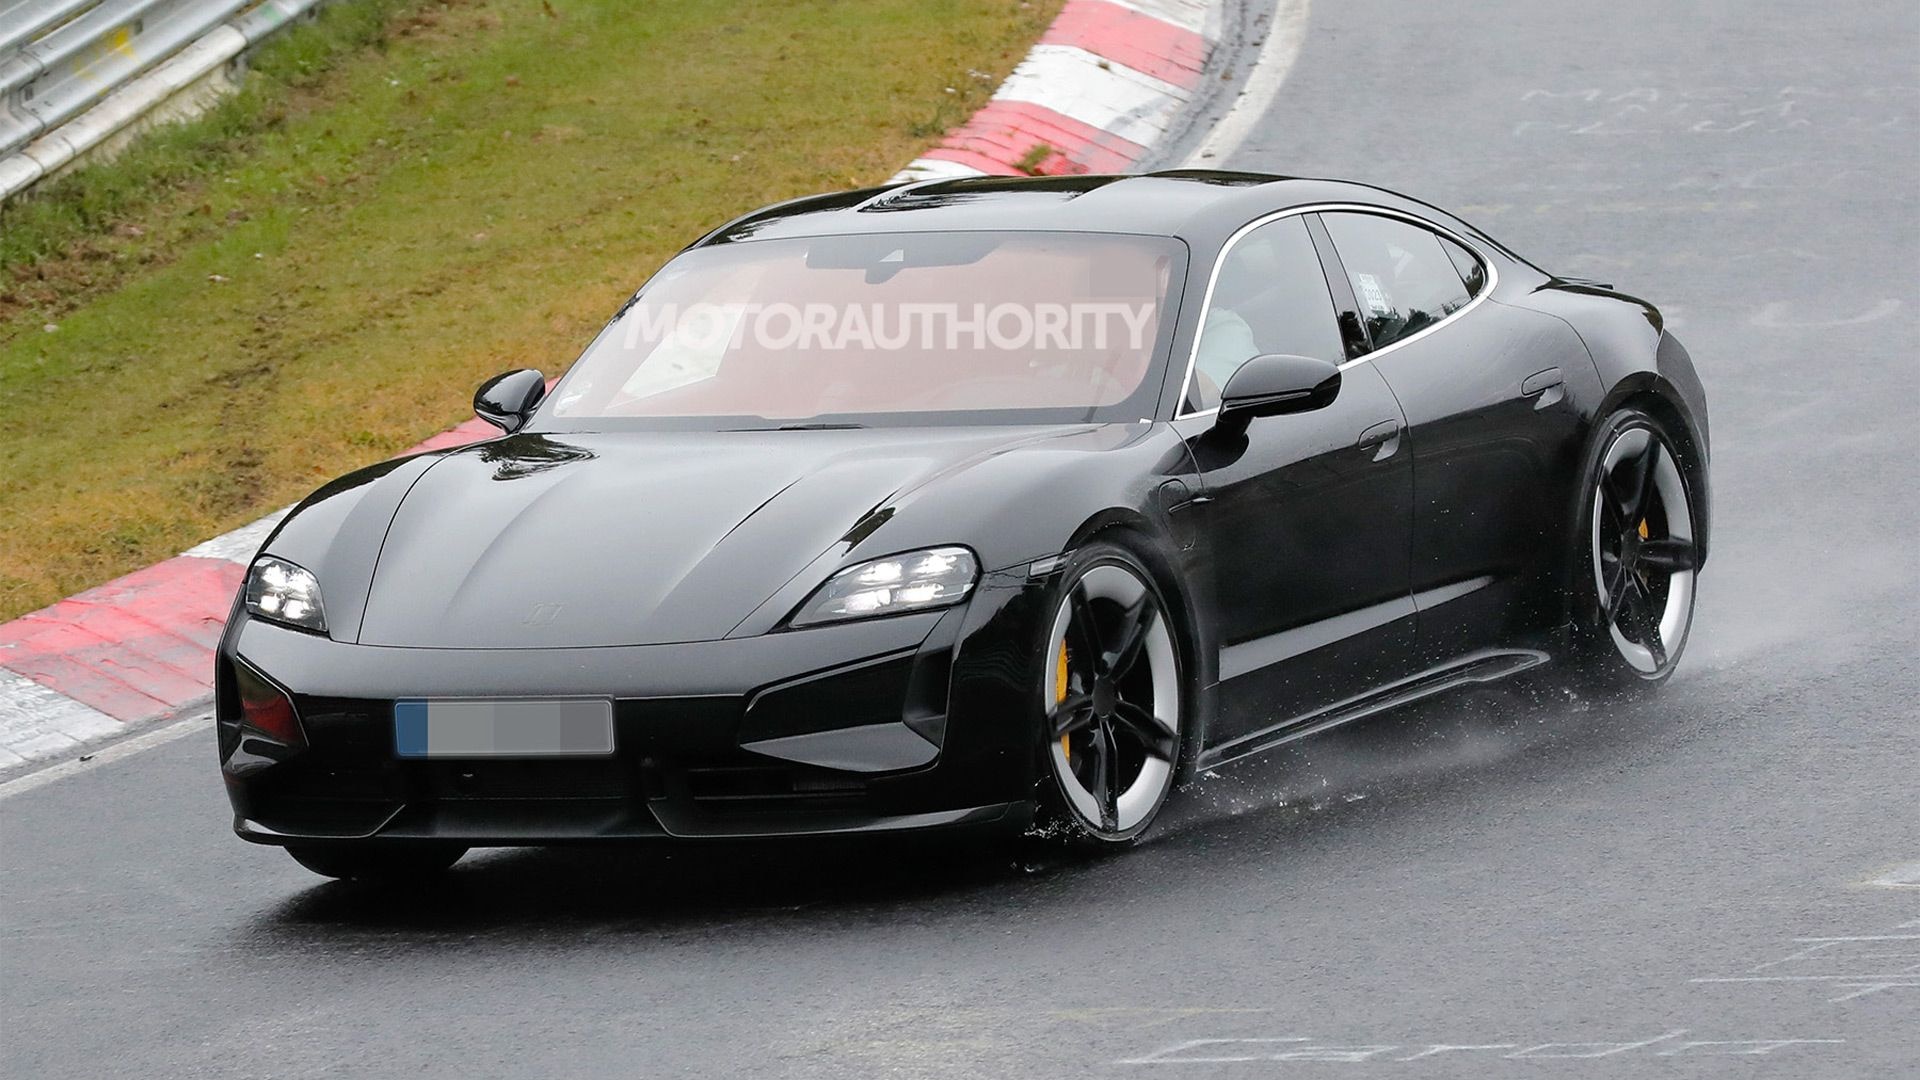 2025 Porsche Taycan sheds all camouflage in latest spy shots